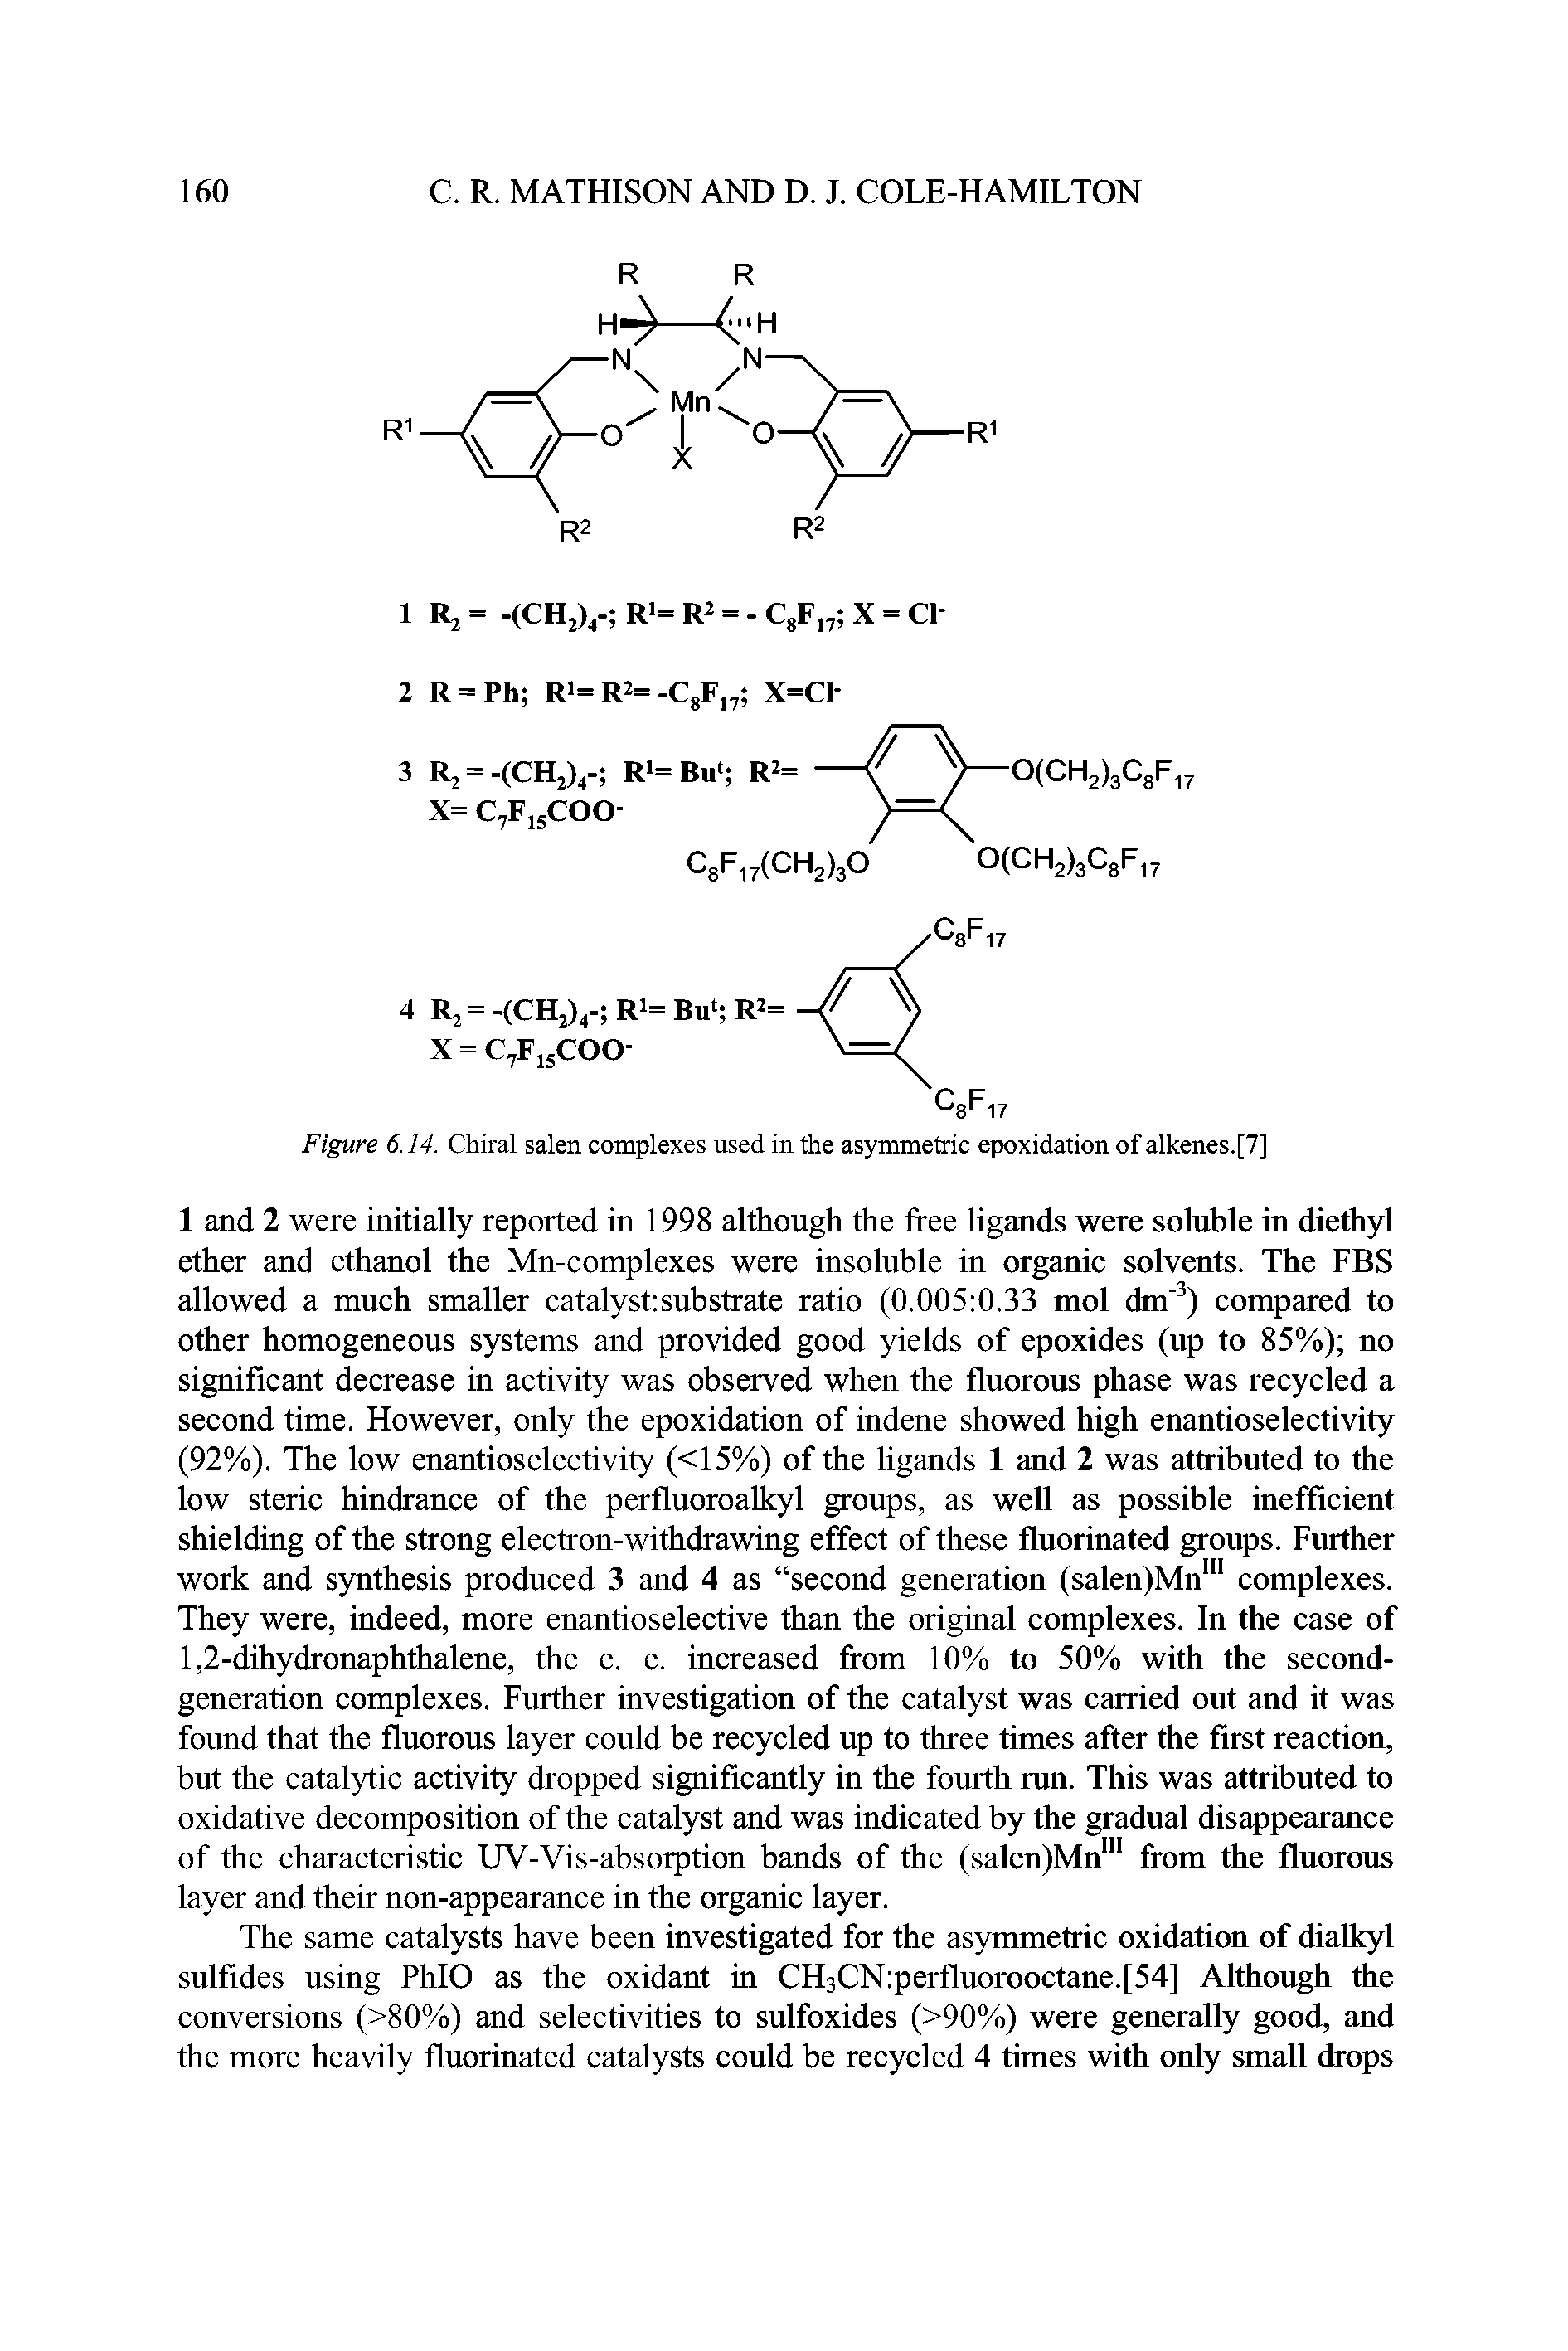 Figure 6.14. Chiral salen complexes used in the asymmetric epoxidation of alkenes.[7]...